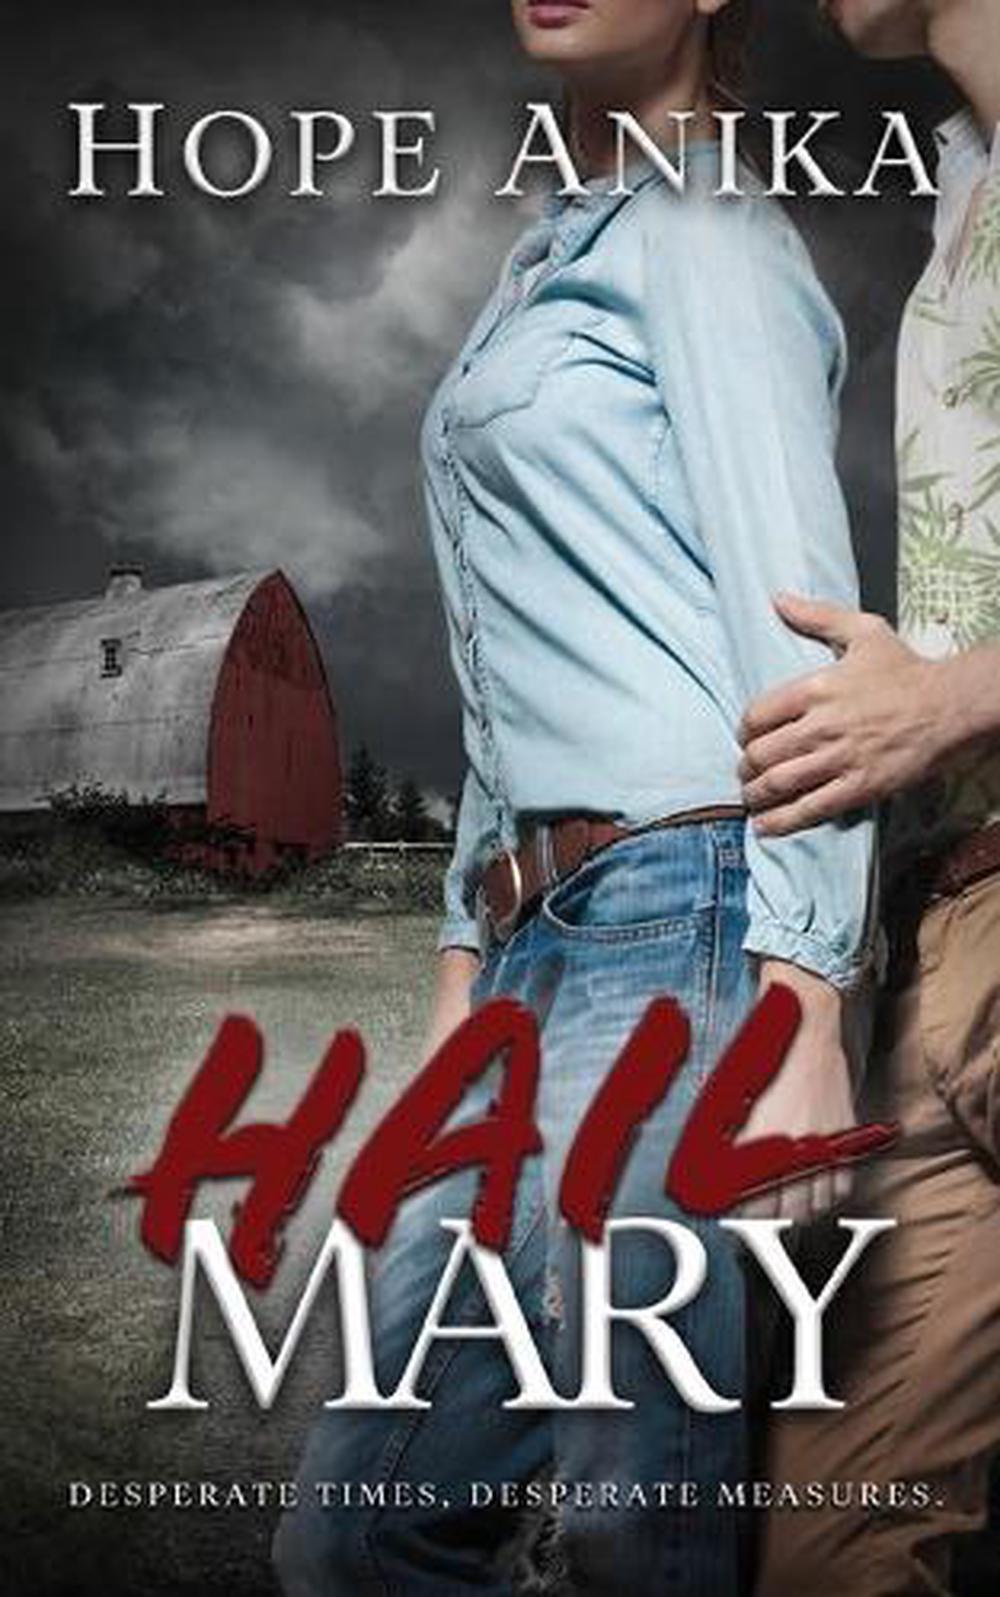 hail mary book review